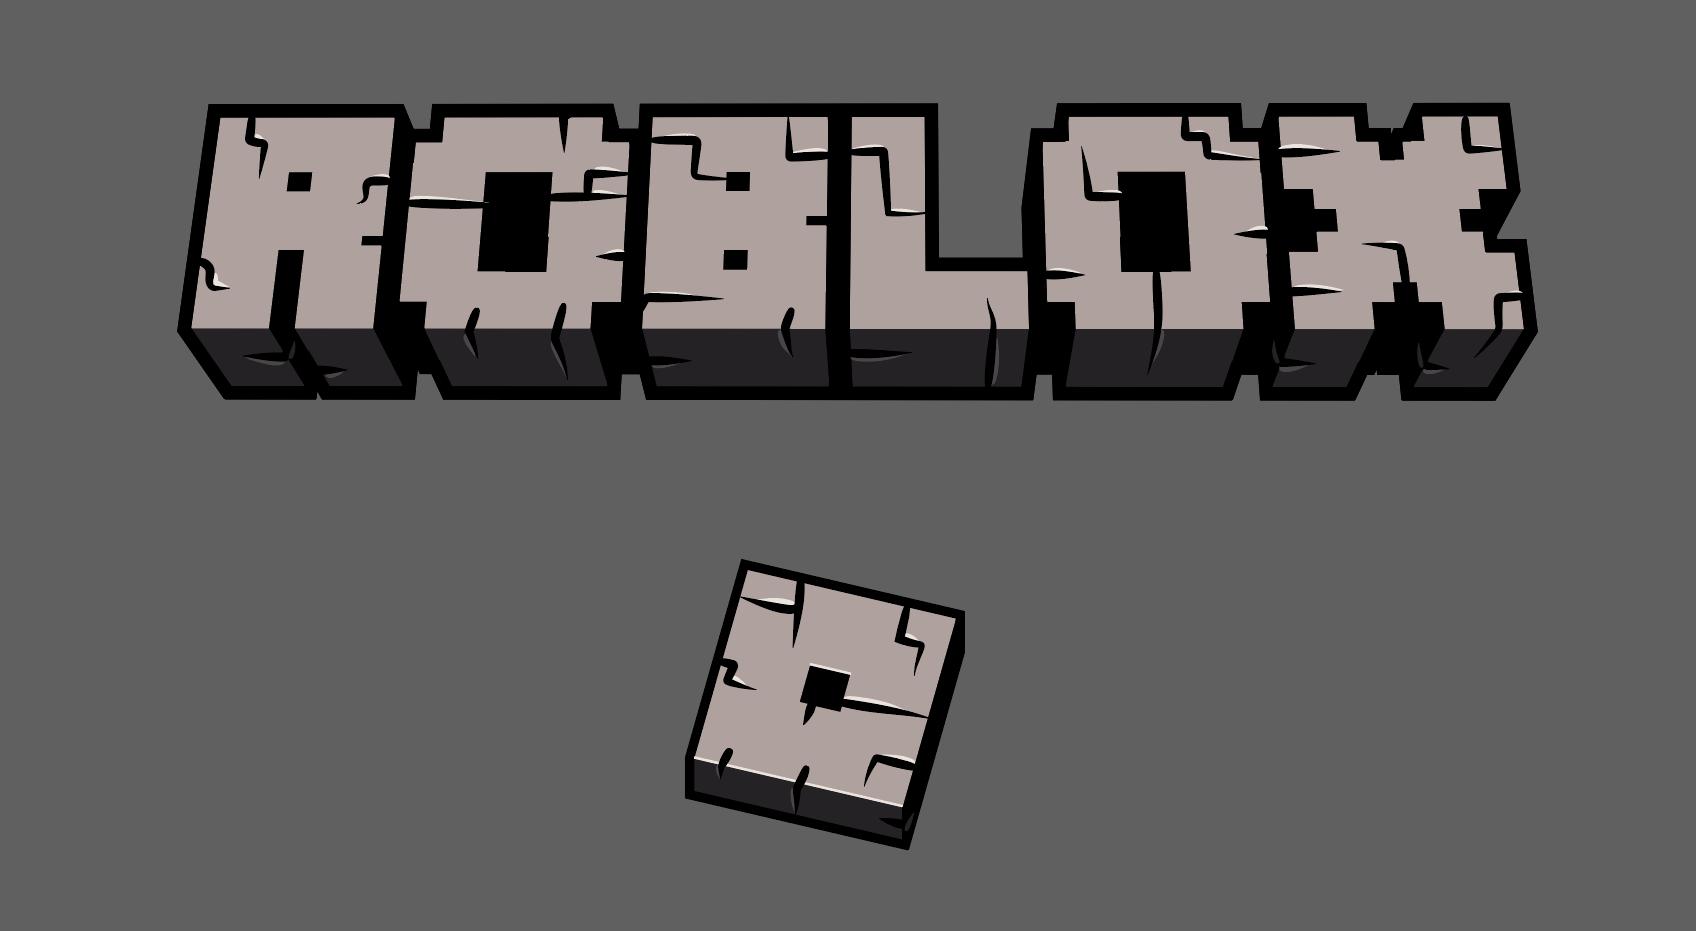 Bloxy News ב-X: A new Robux icon has been found in the #Roblox files. This  may potentially be the future Robux icon, potentially with the full release  of Premium. This was also